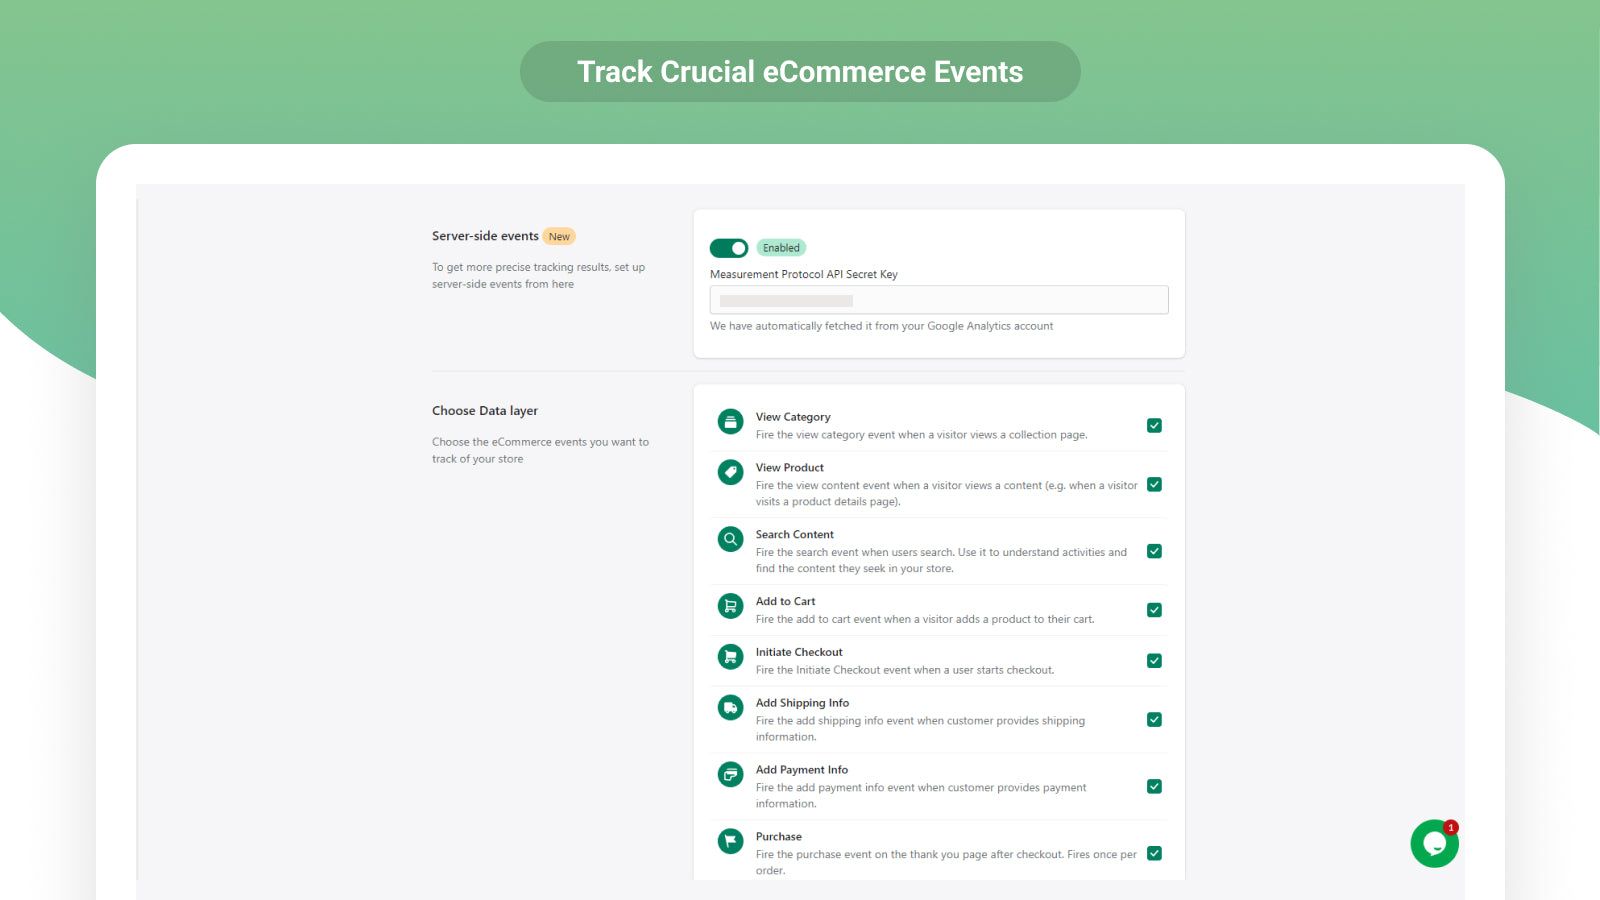 Track Crucial eCommerce Events